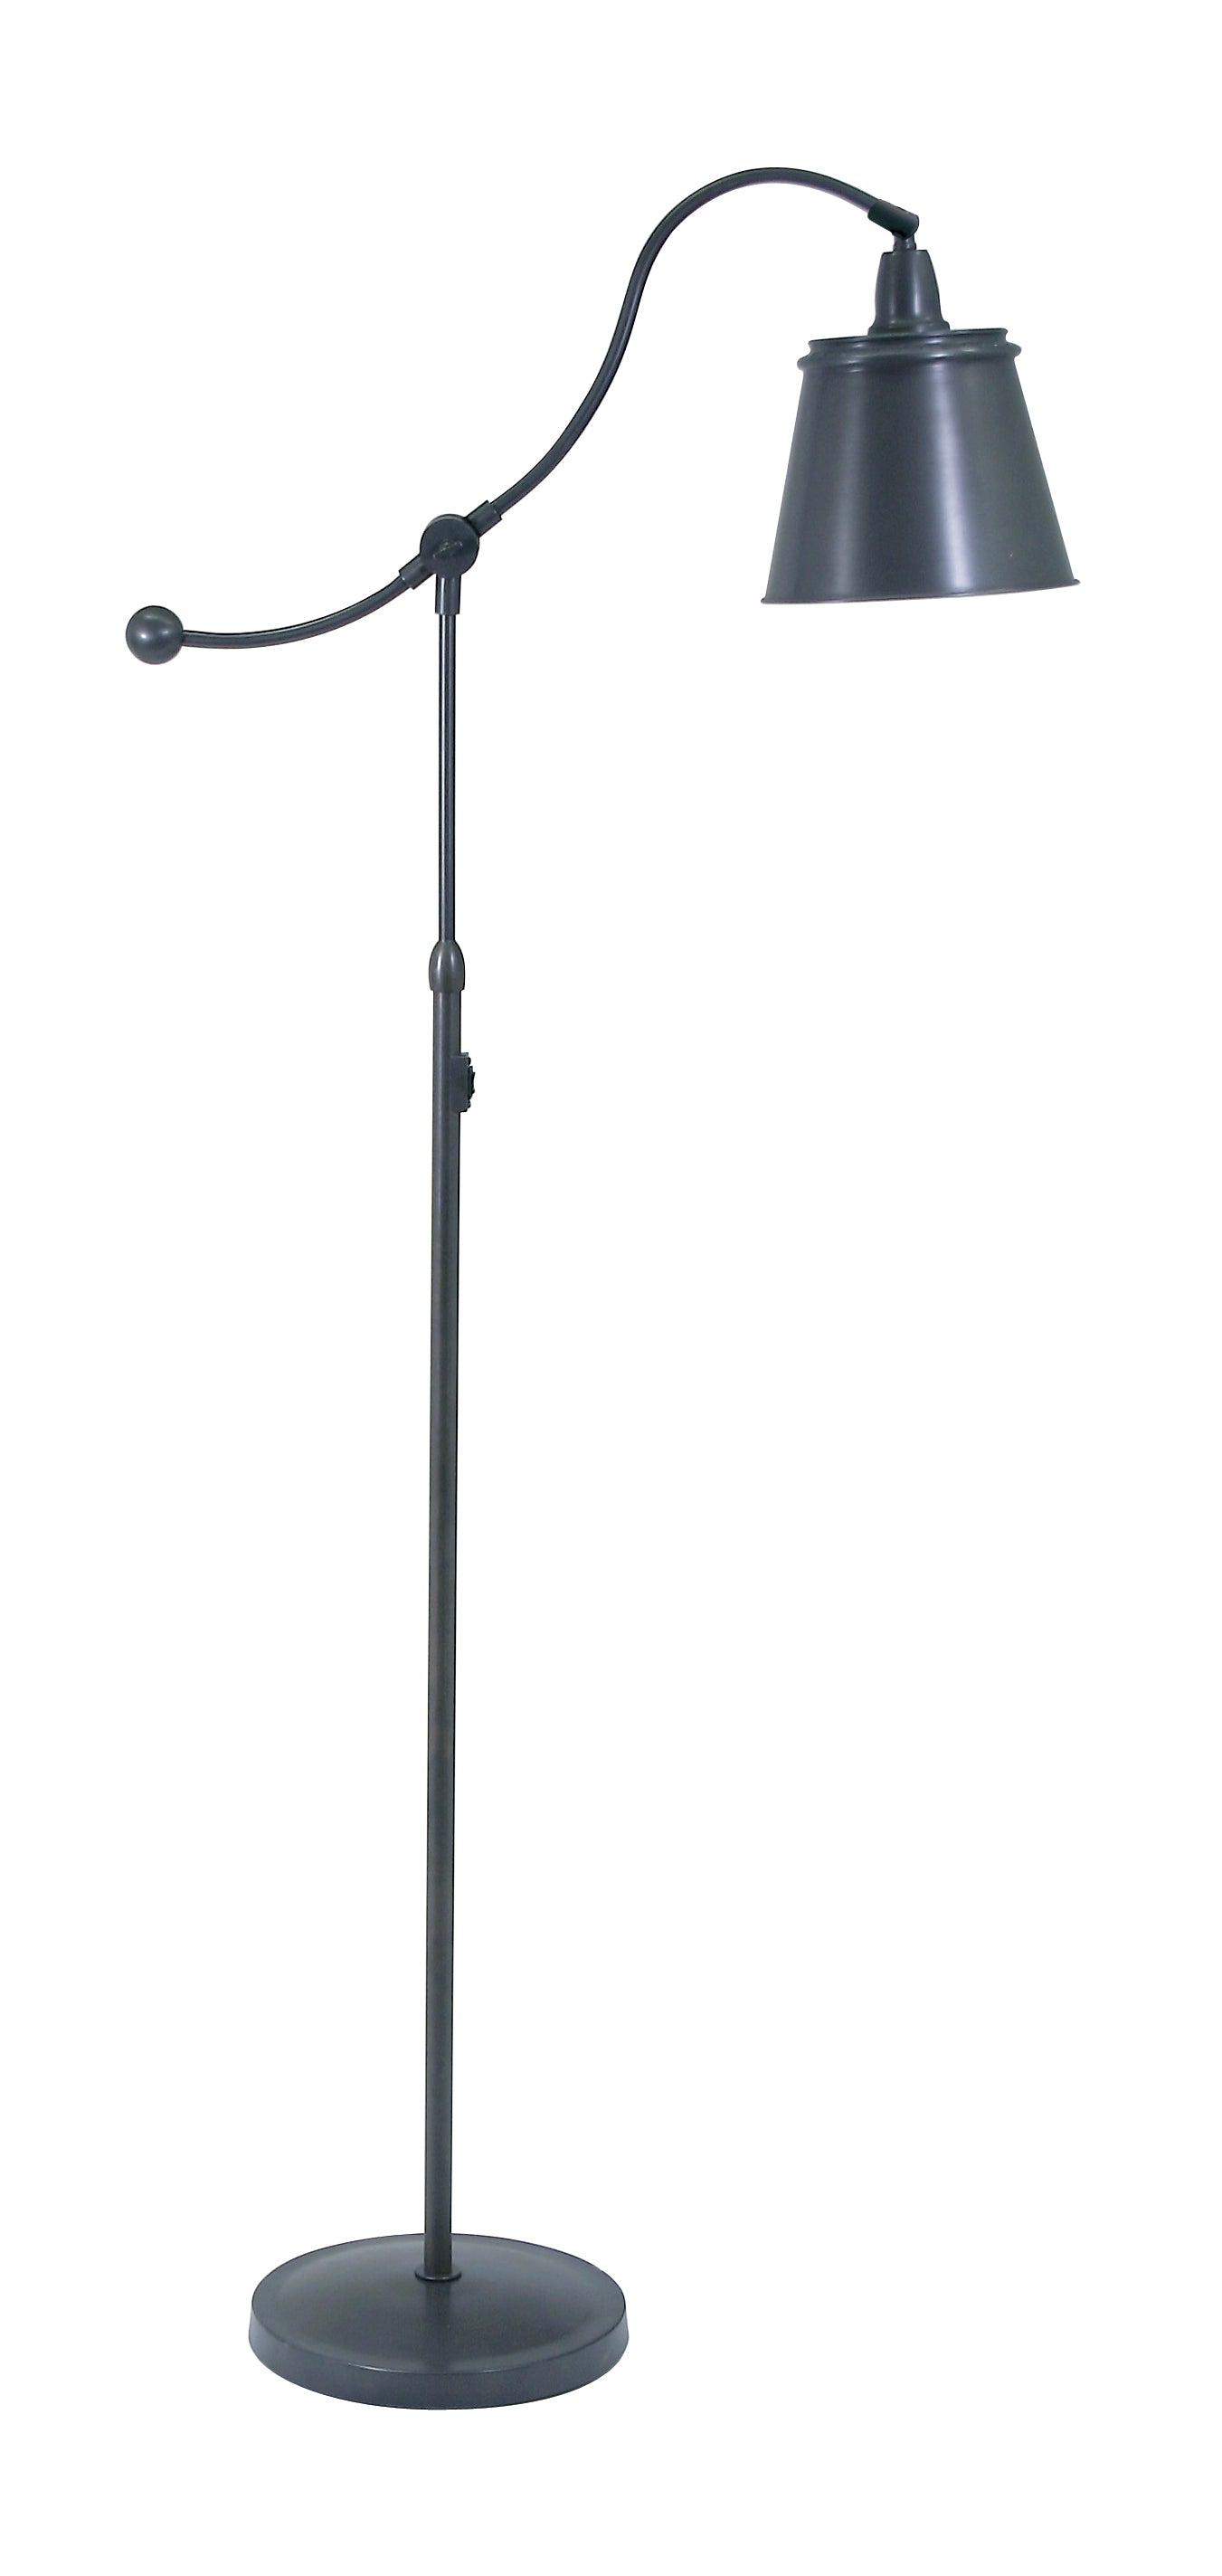 House of Troy Hyde Park Floor Lamp Oil Rubbed Bronze w/Metal Shade HP700-OB-MSOB